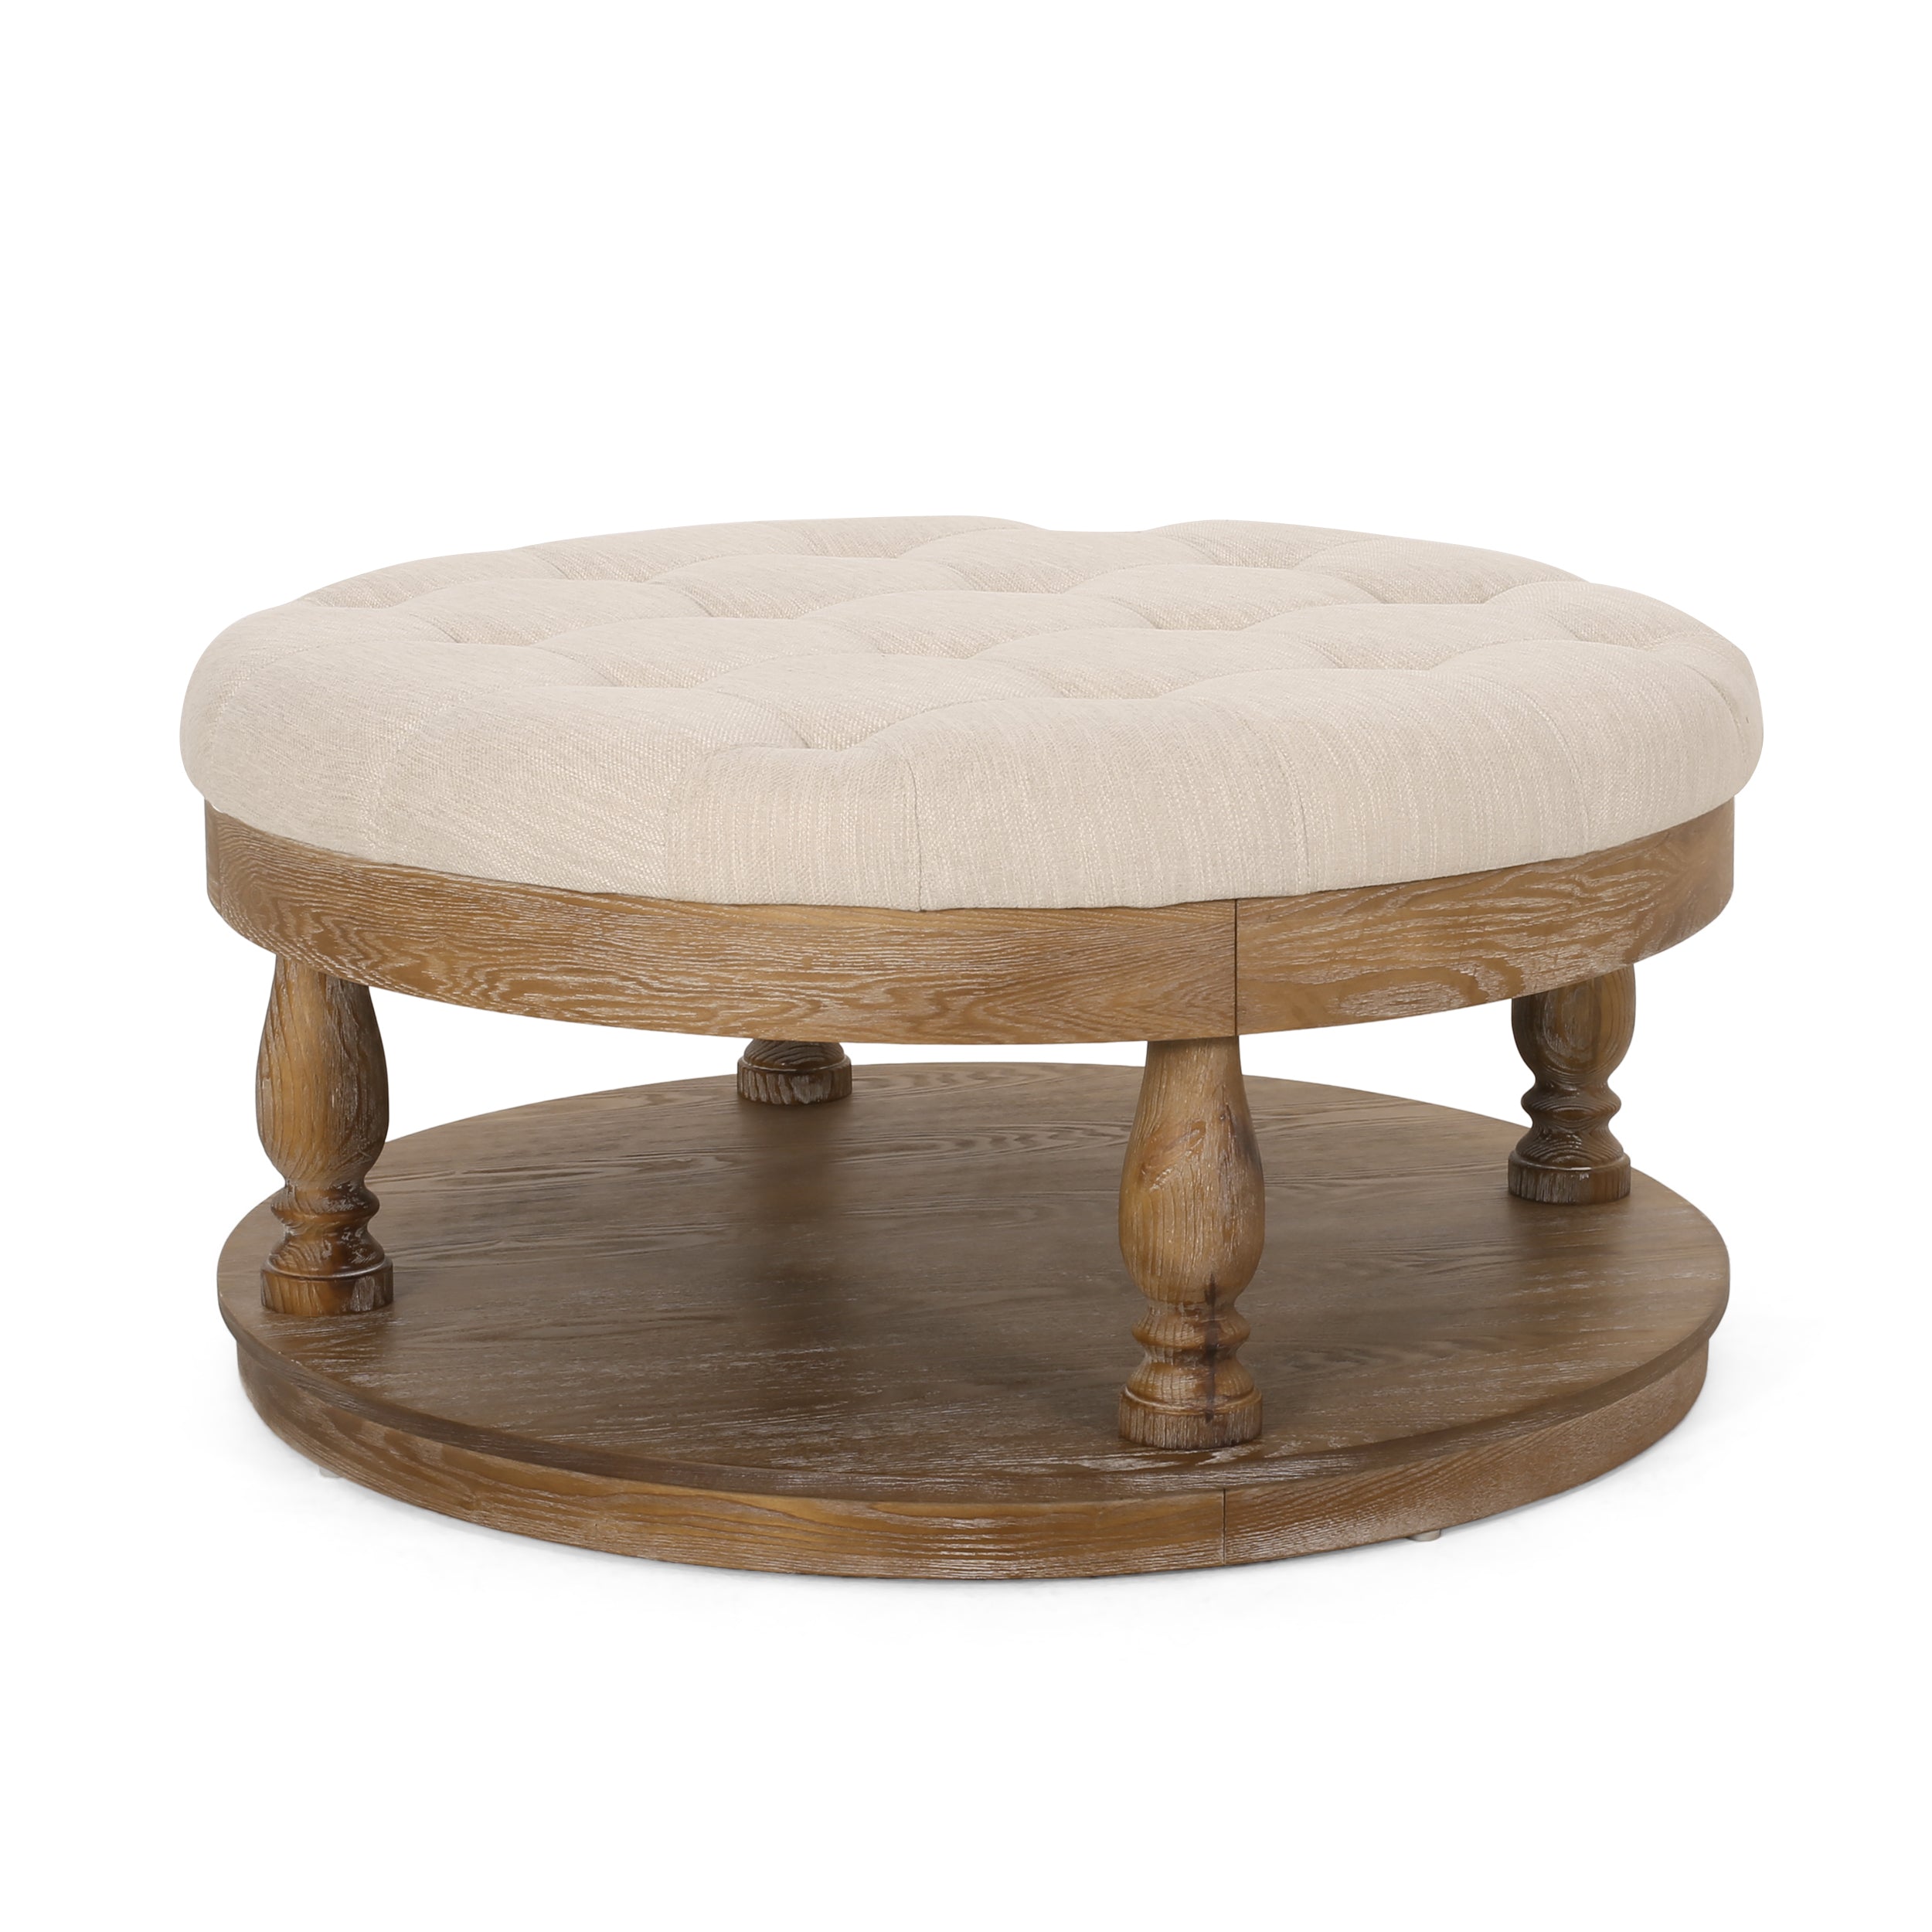 Andrue Contemporary Upholstered Round Ottoman WeatheredBeige